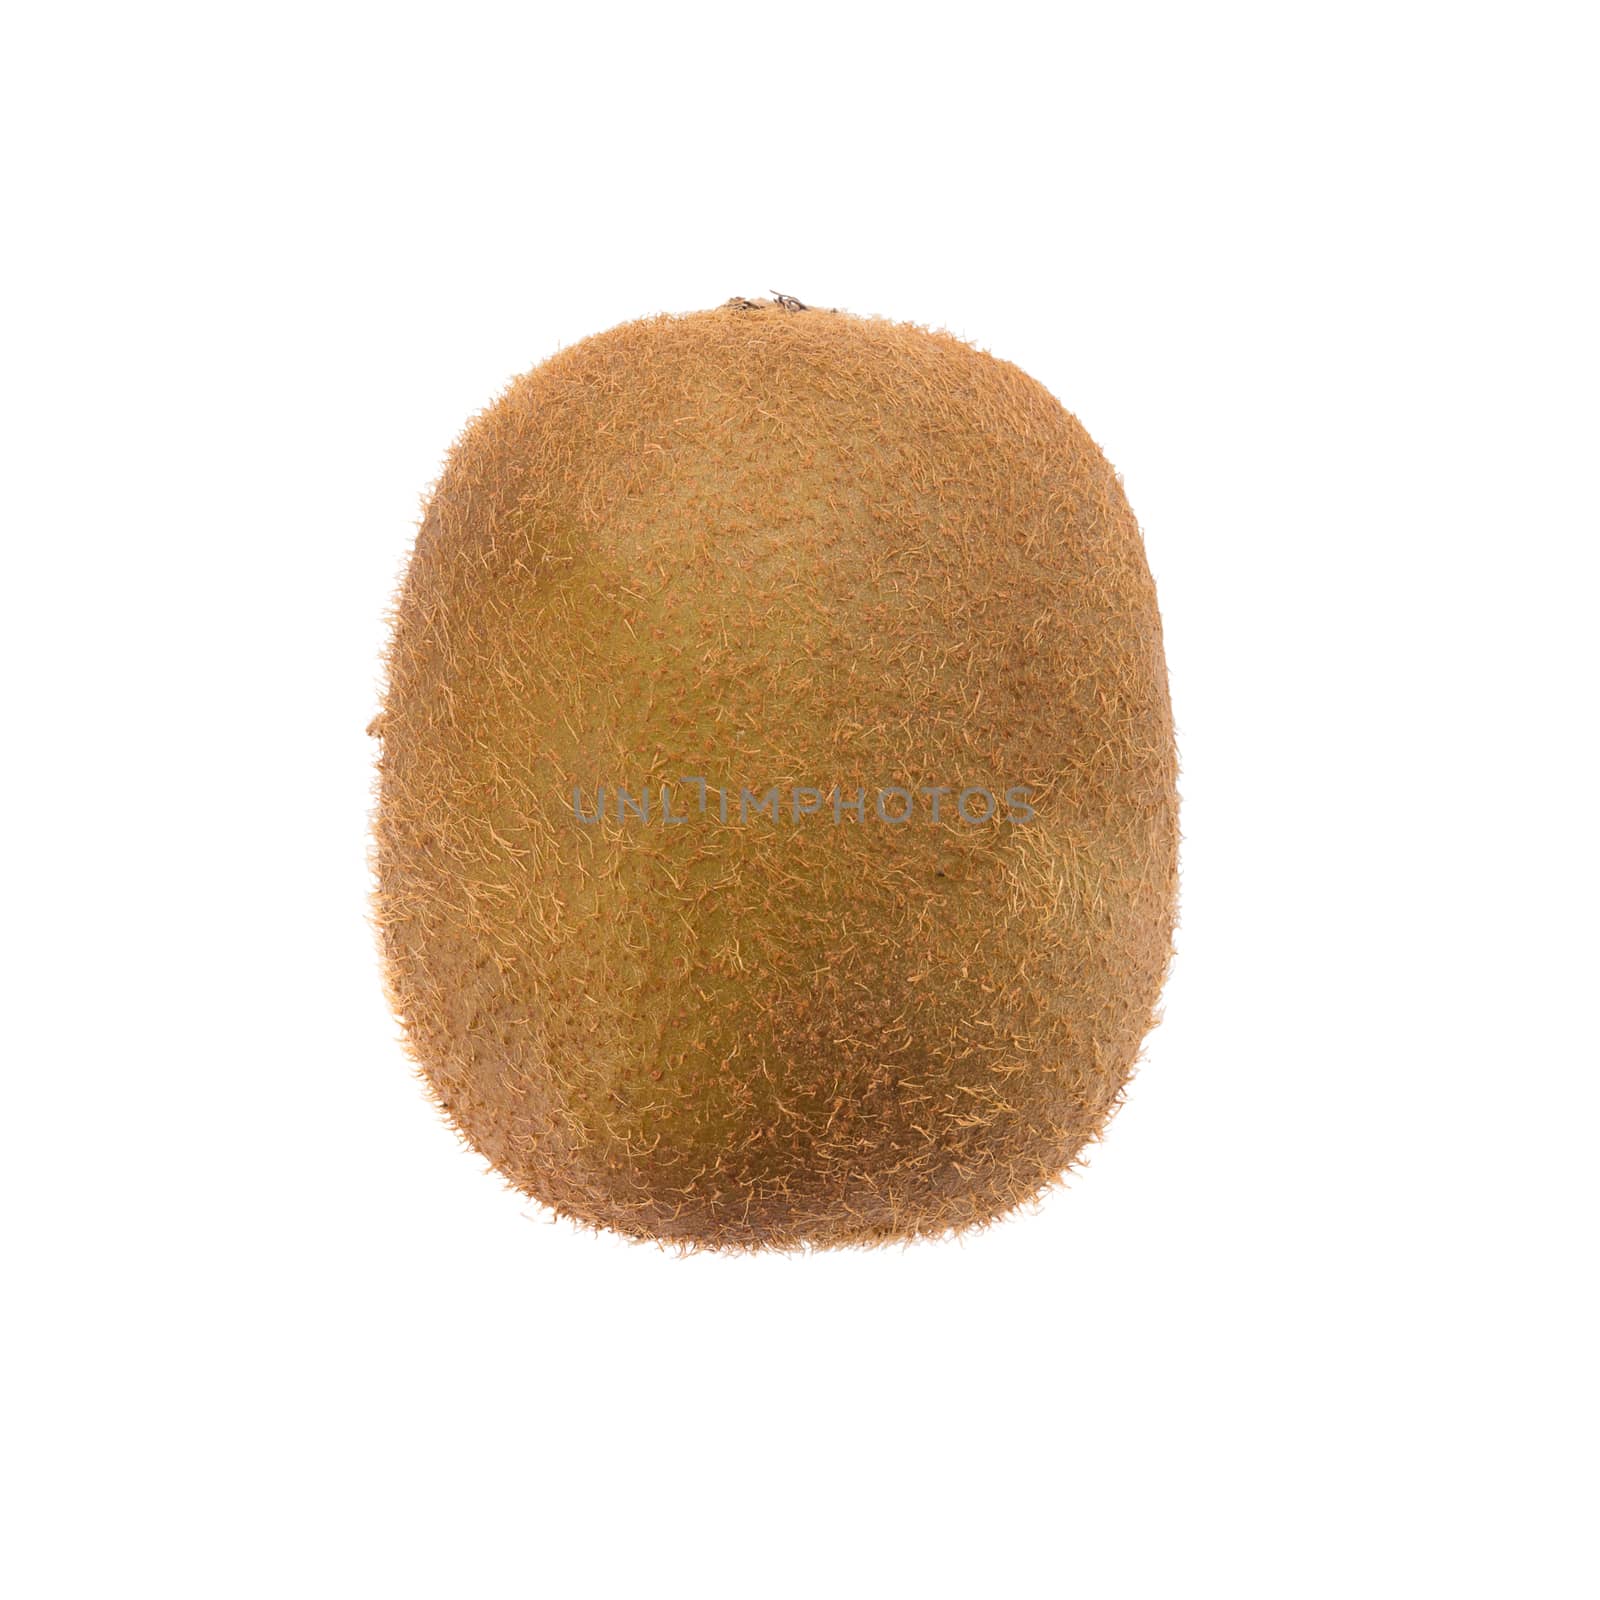 kiwi isolated on white background, top view by kaiskynet